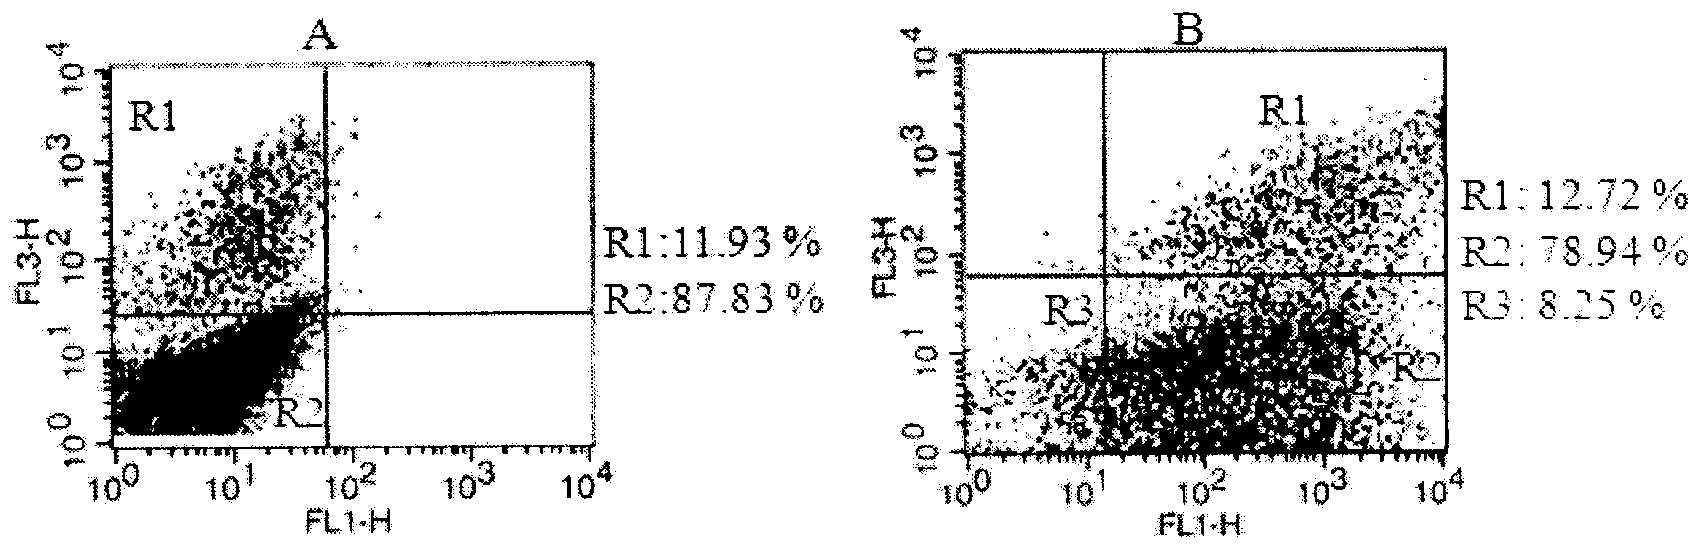 Method for detecting activities of cells in fermenting process through adopting flow cytometry (FCM)